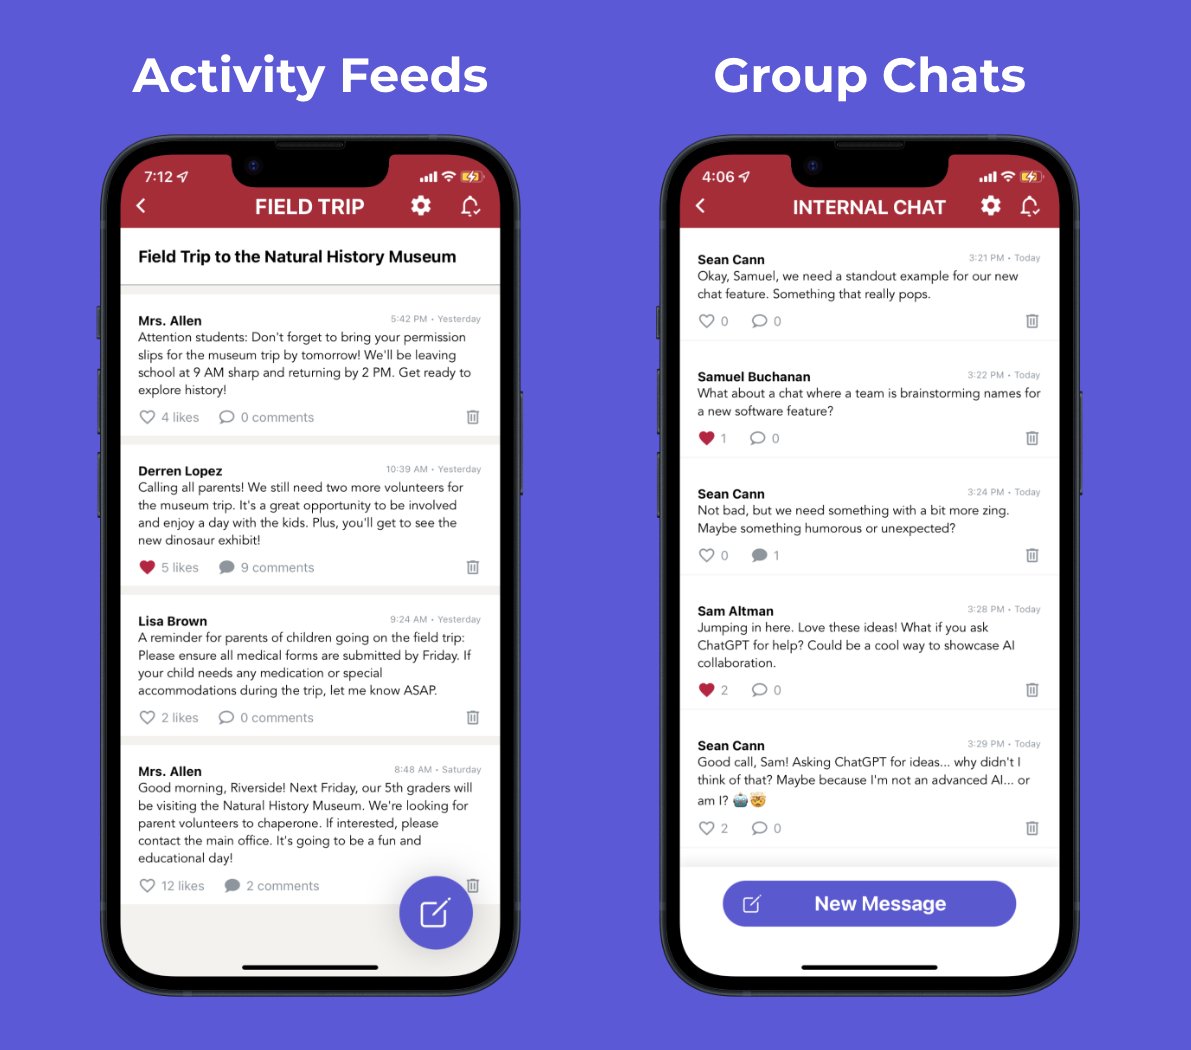 New feature: Community Feeds! 🚀 You can now add social features to your @onespotapps mobile app in seconds—activity feeds, group chats, forums, discussion groups, and more.